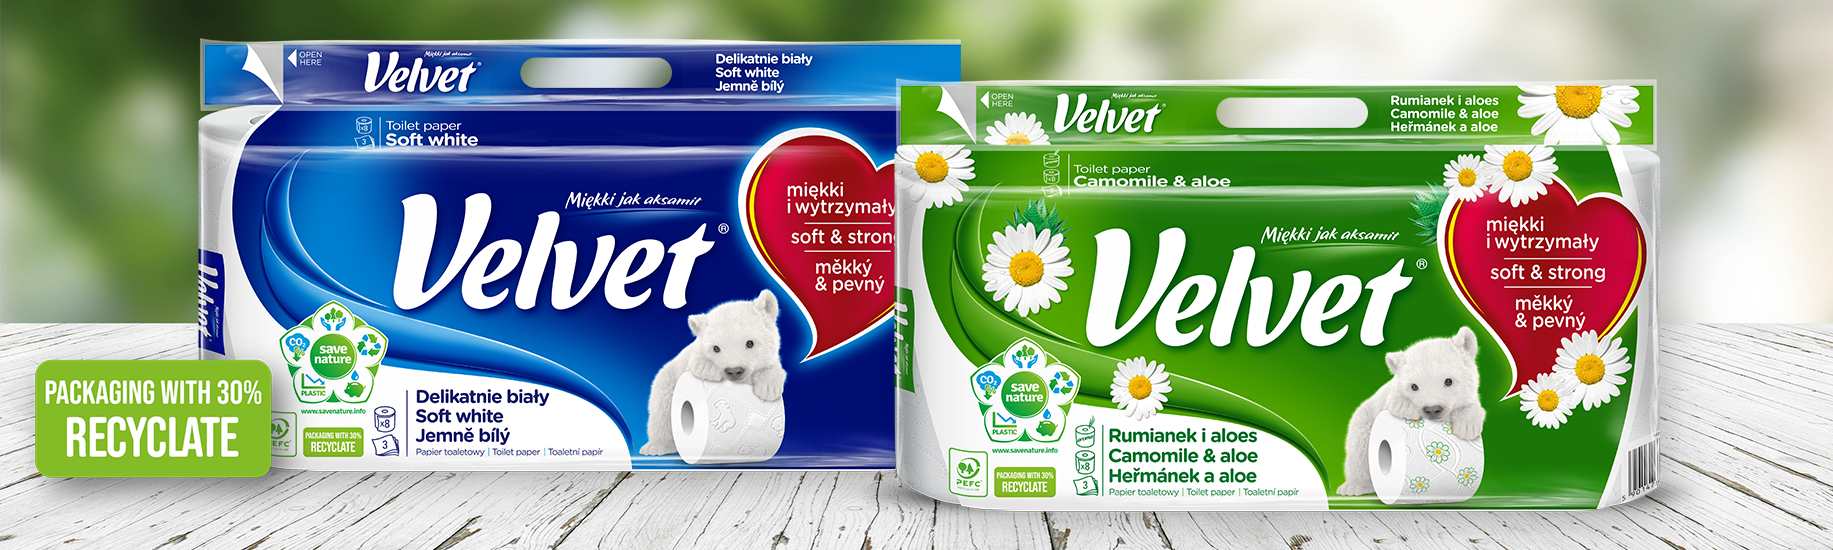 New Velvet toilet paper packaging made from recyclate